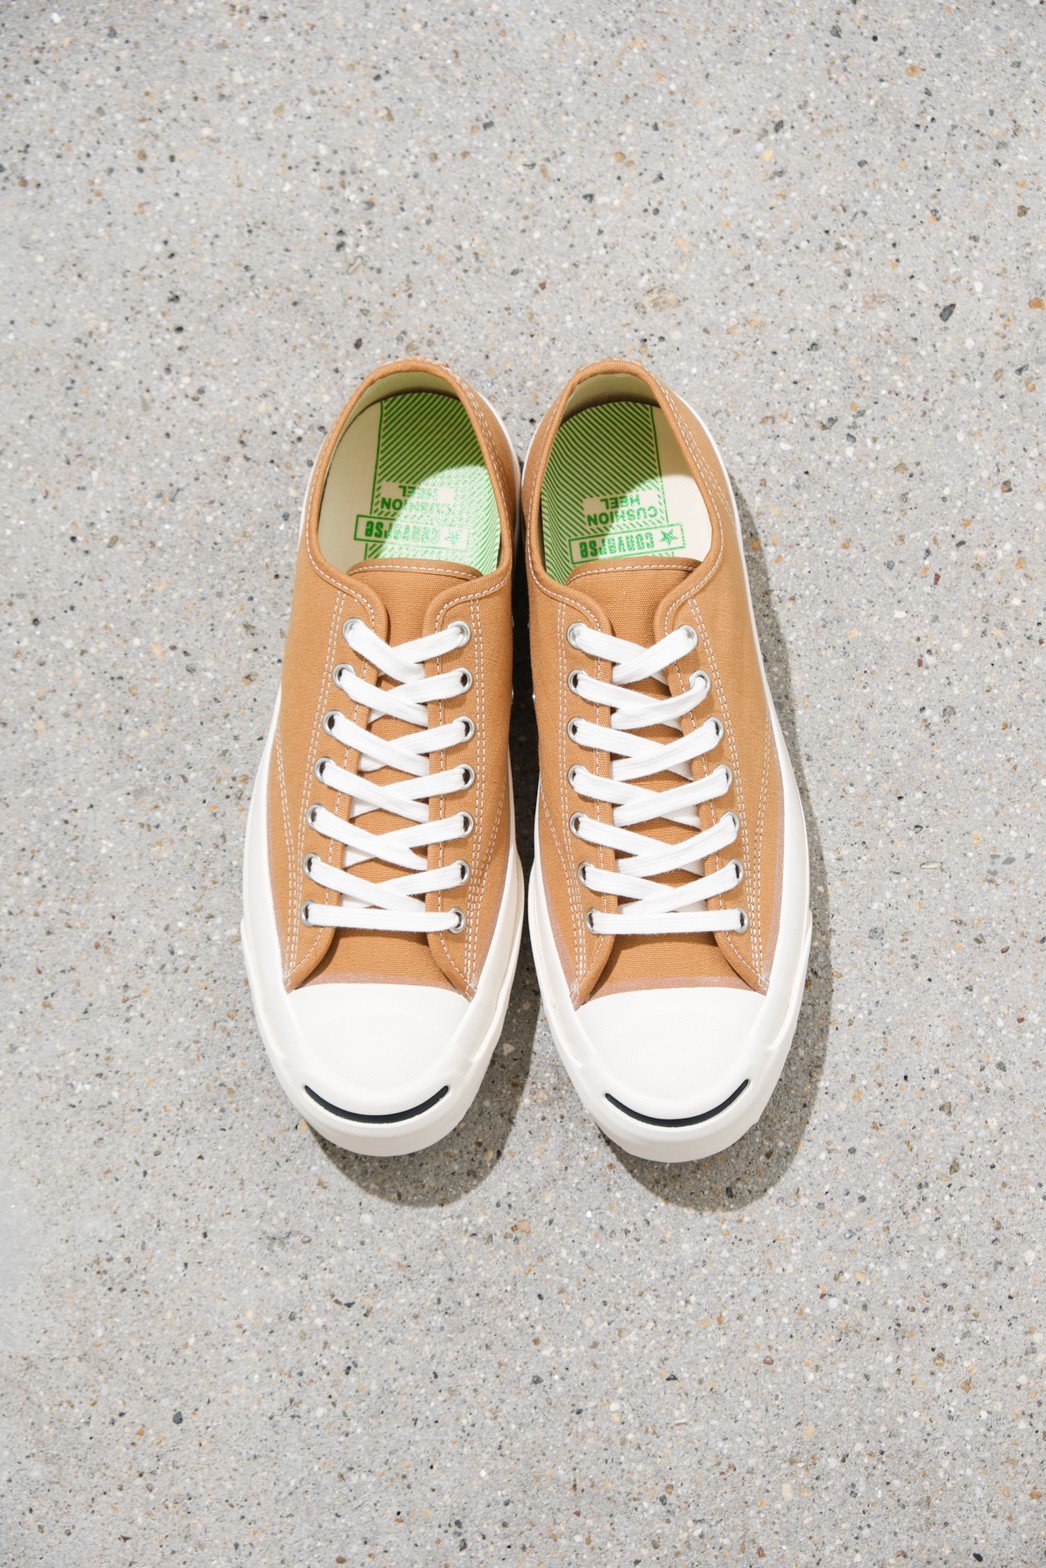 CONVERSE ADDICT / JACK PURCELL CANVAS CAMEL